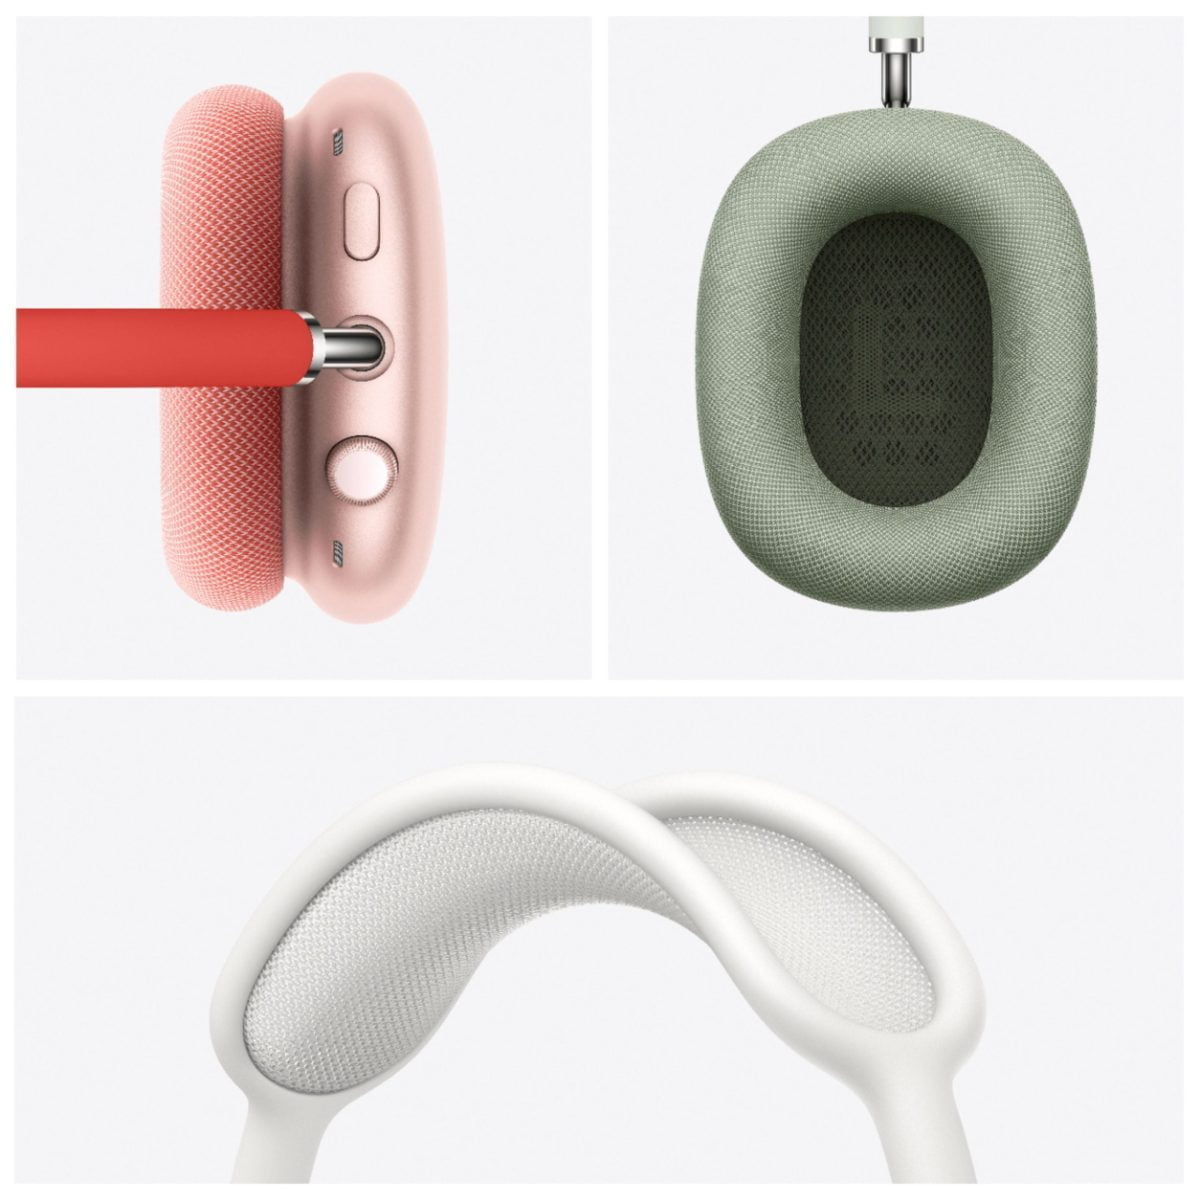 6373460Cv15D Scaled Apple &Lt;H1&Gt;Apple Airpods Max - Green&Lt;/H1&Gt; &Lt;Div Class=&Quot;Long-Description-Container Body-Copy &Quot;&Gt; &Lt;Div Class=&Quot;Product-Description&Quot;&Gt;Airpods Max Reimagine Over-Ear Headphones. An Apple-Designed Dynamic Driver Provides Immersive High-Fidelity Audio. Every Detail, From Canopy To Cushions, Has Been Designed For An Exceptional Fit. Active Noise Cancellation Blocks Outside Noise, While Transparency Mode Lets It In. And Spatial Audio With Dynamic Head Tracking Provides Theater-Like Sound That Surrounds You.&Lt;/Div&Gt; &Lt;/Div&Gt; Apple Airpods Apple Airpods Max - Green With Light Green Headband - Mgyn2